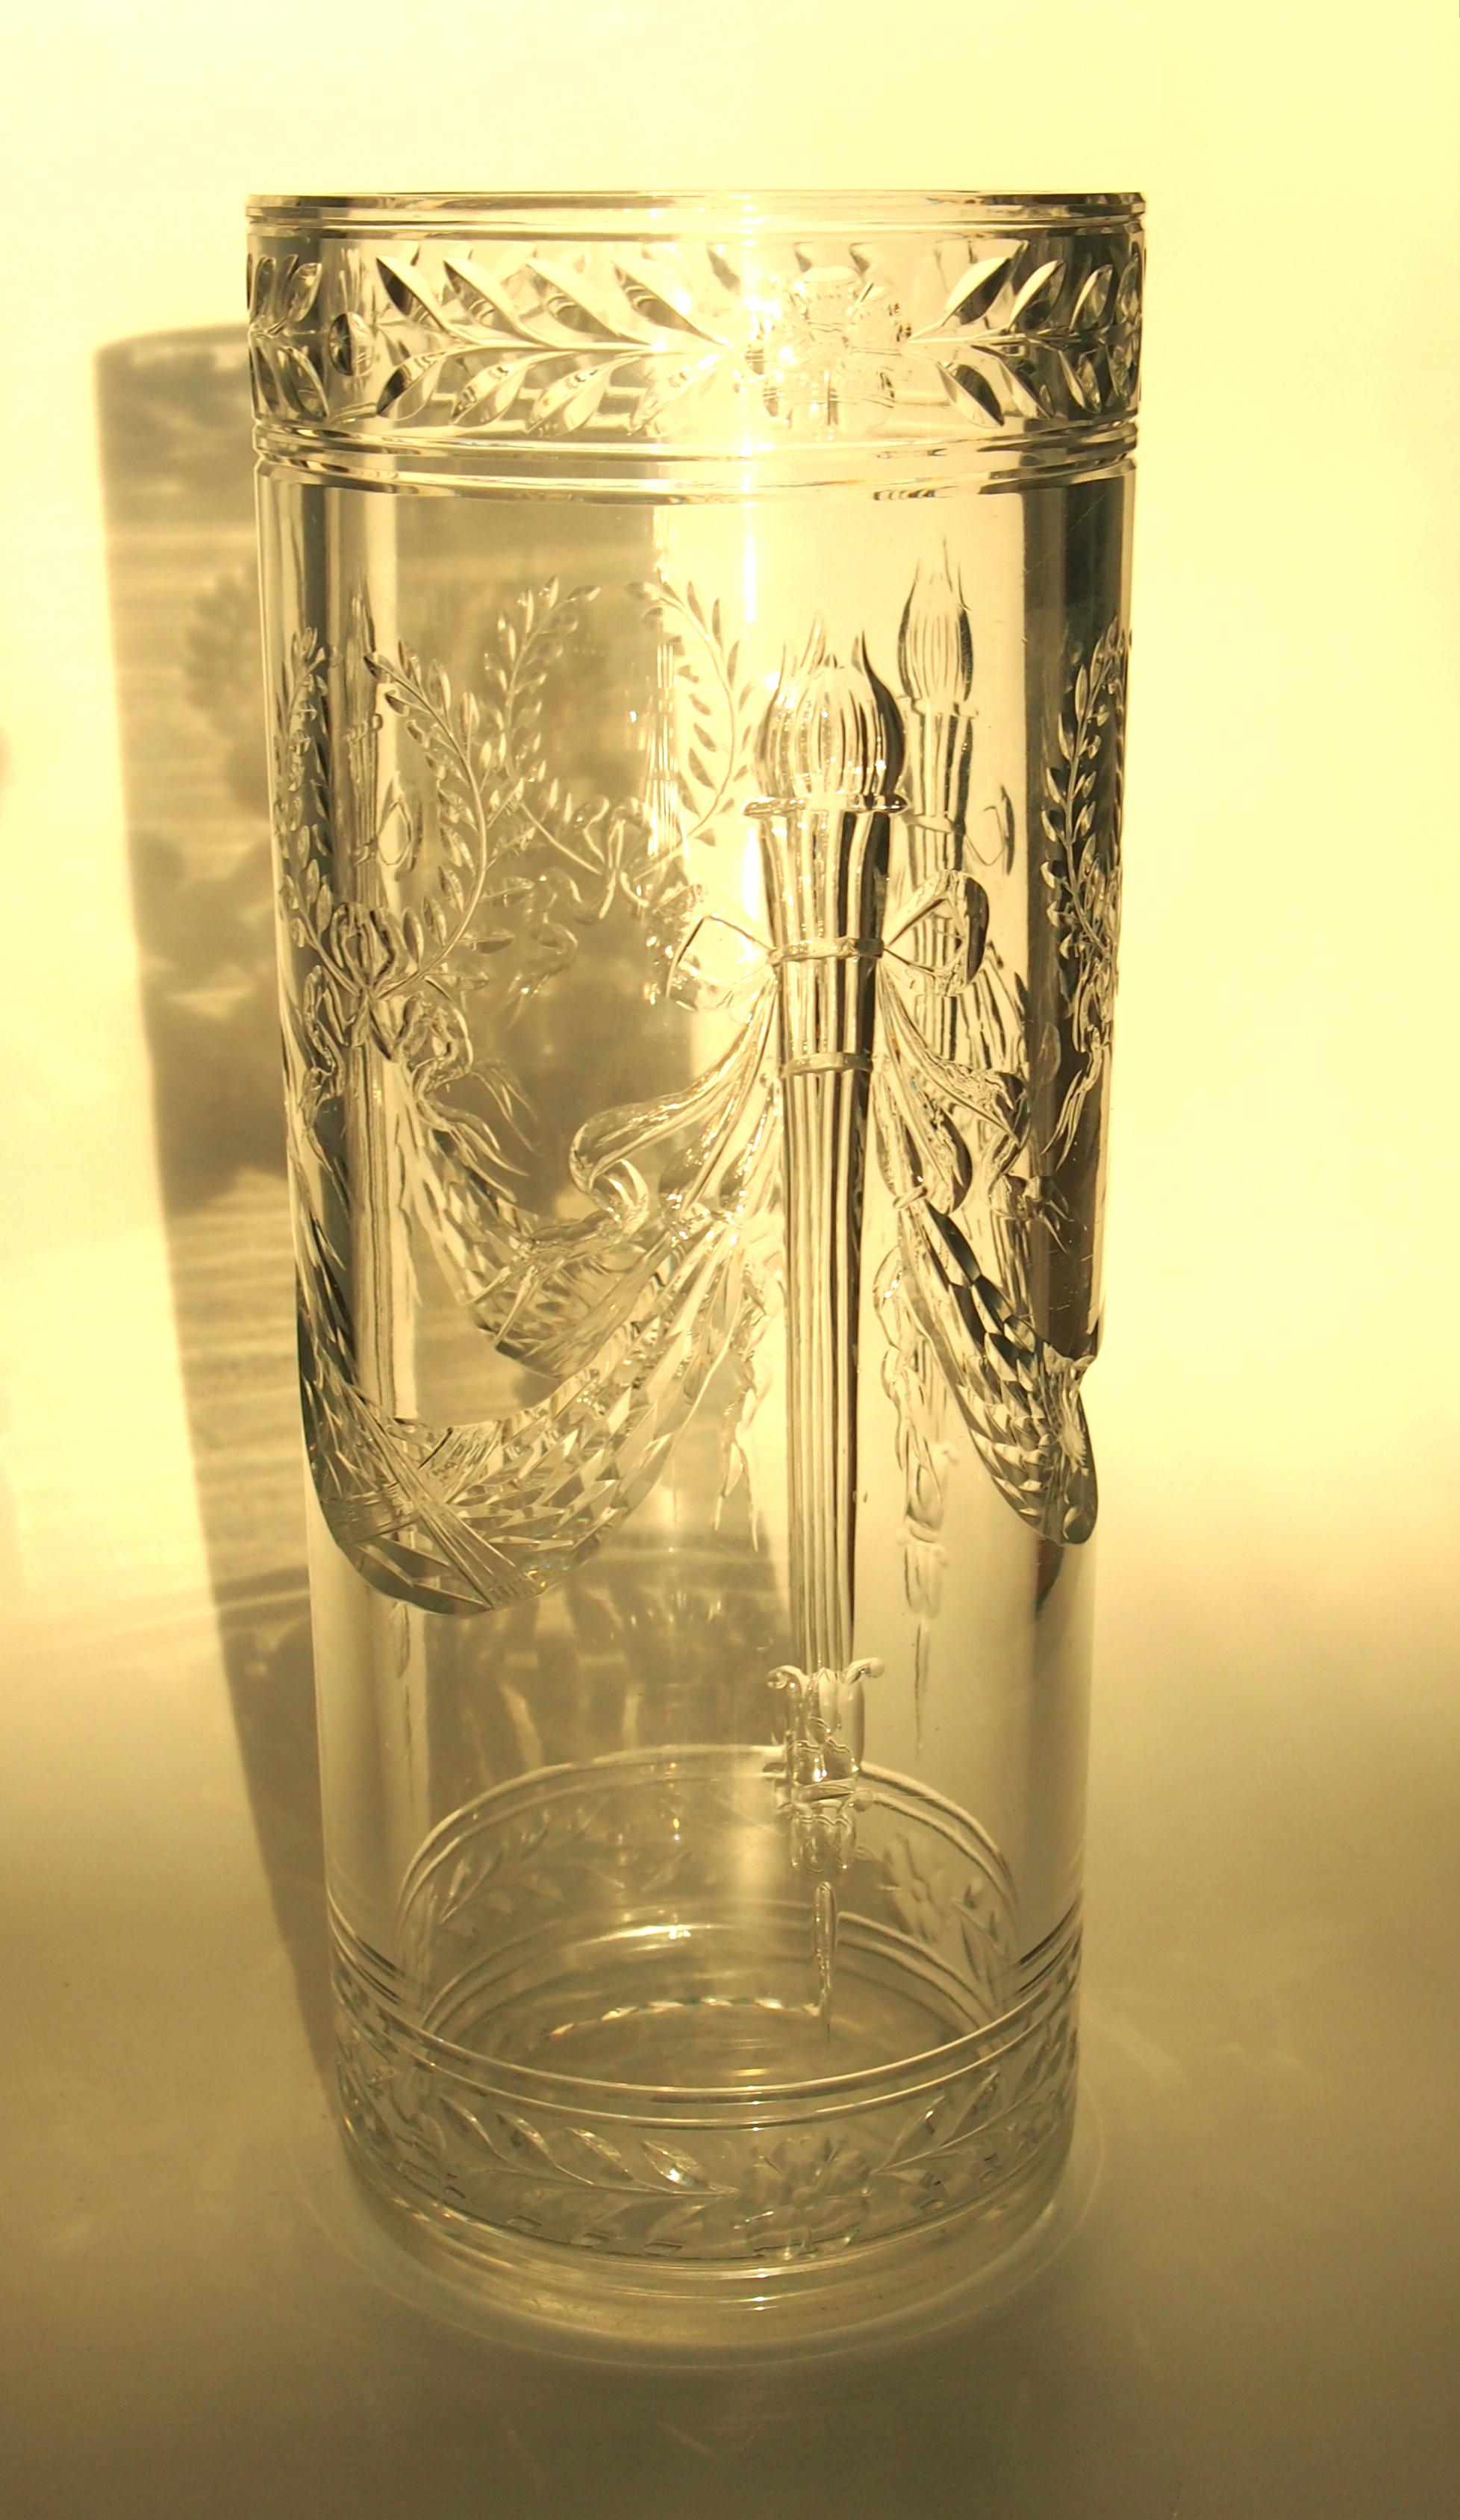 Important Baccarat original lead crystal cut 'Arcole' vase produced in 1904 -Part of the early 20th century 'Empire Revival' - This beautiful vase celebrates Napoleon's first important victory (the Battle of the Bridge at Arcole-1796) -the vase is